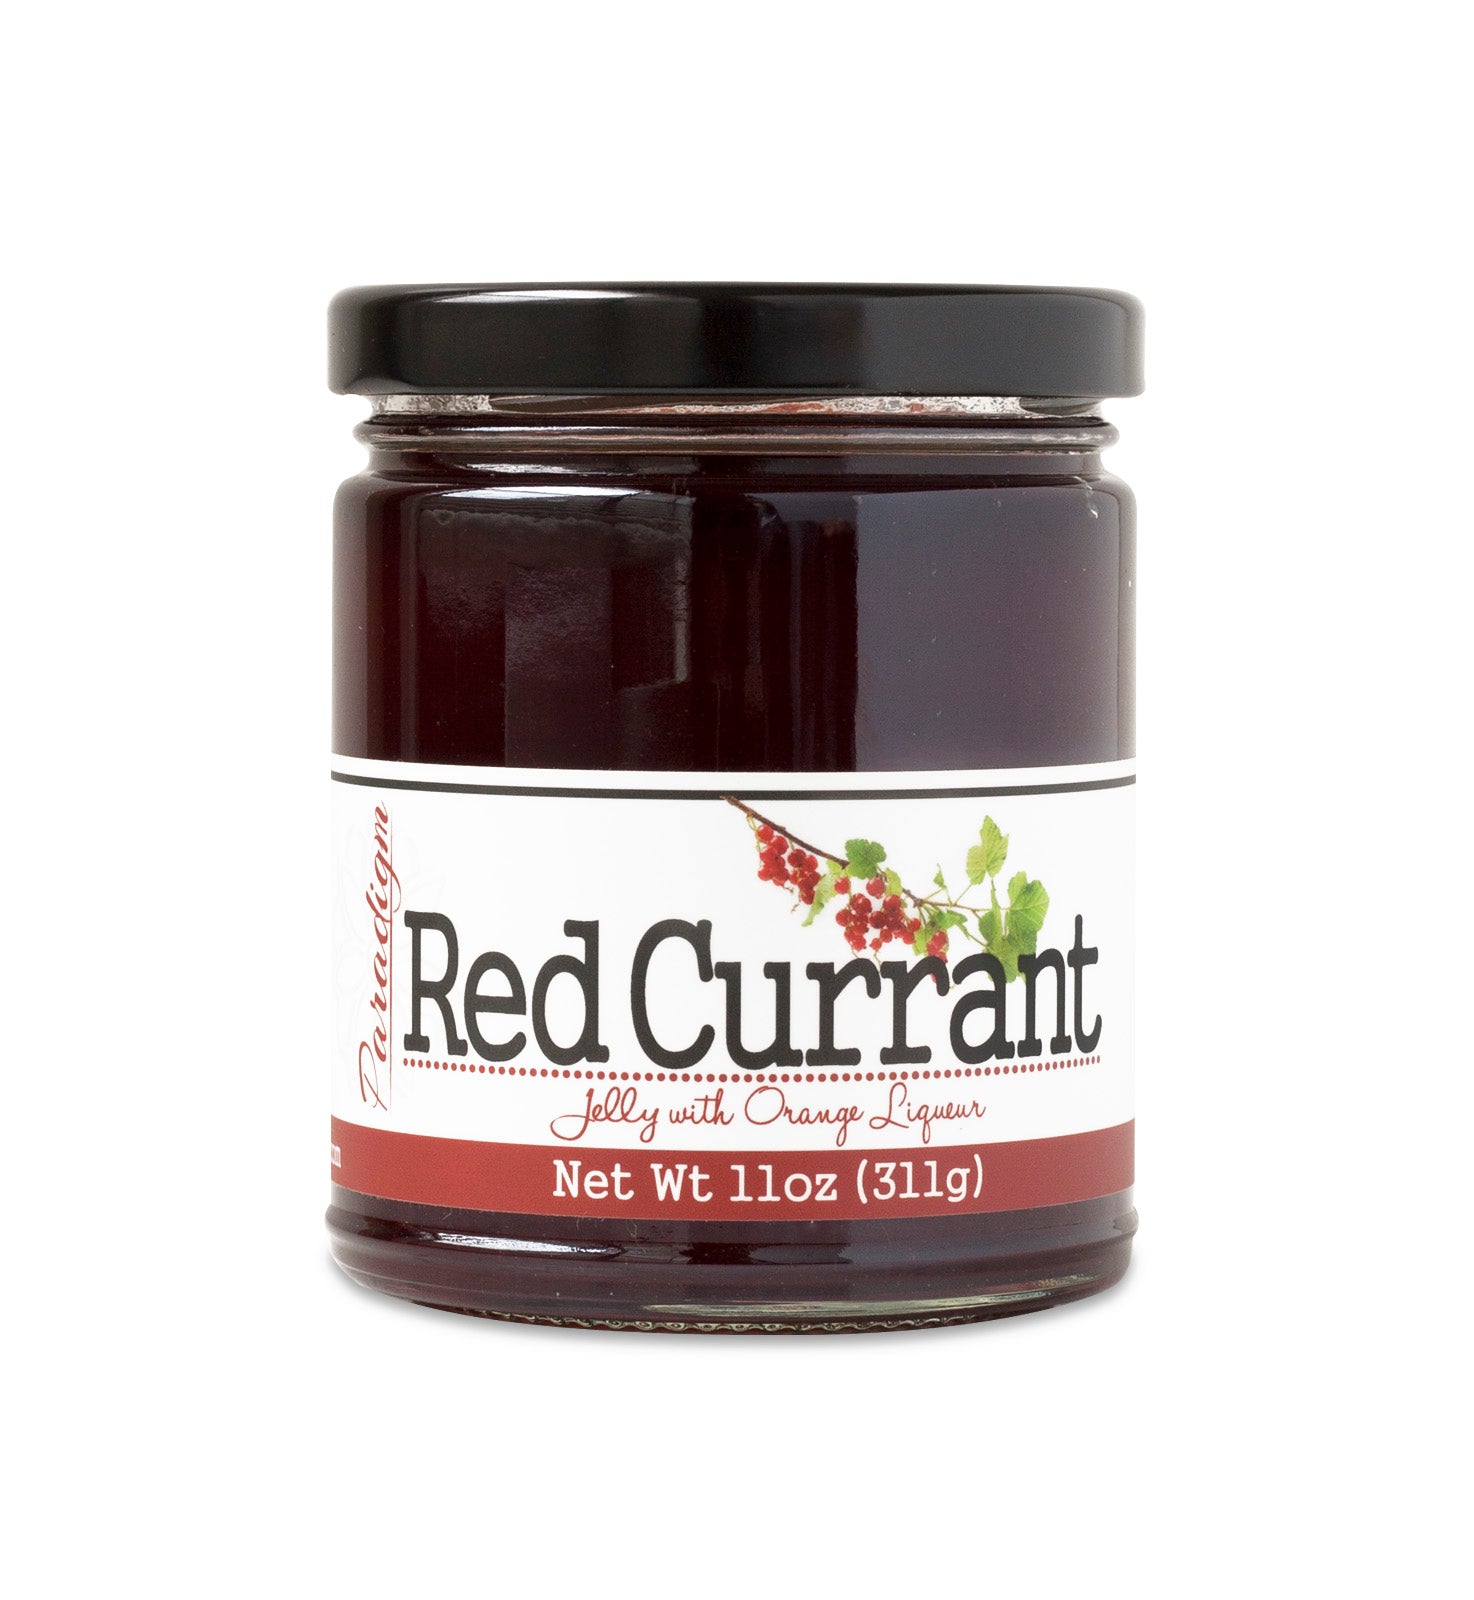 Red Currant Jelly - The Daring Gourmet